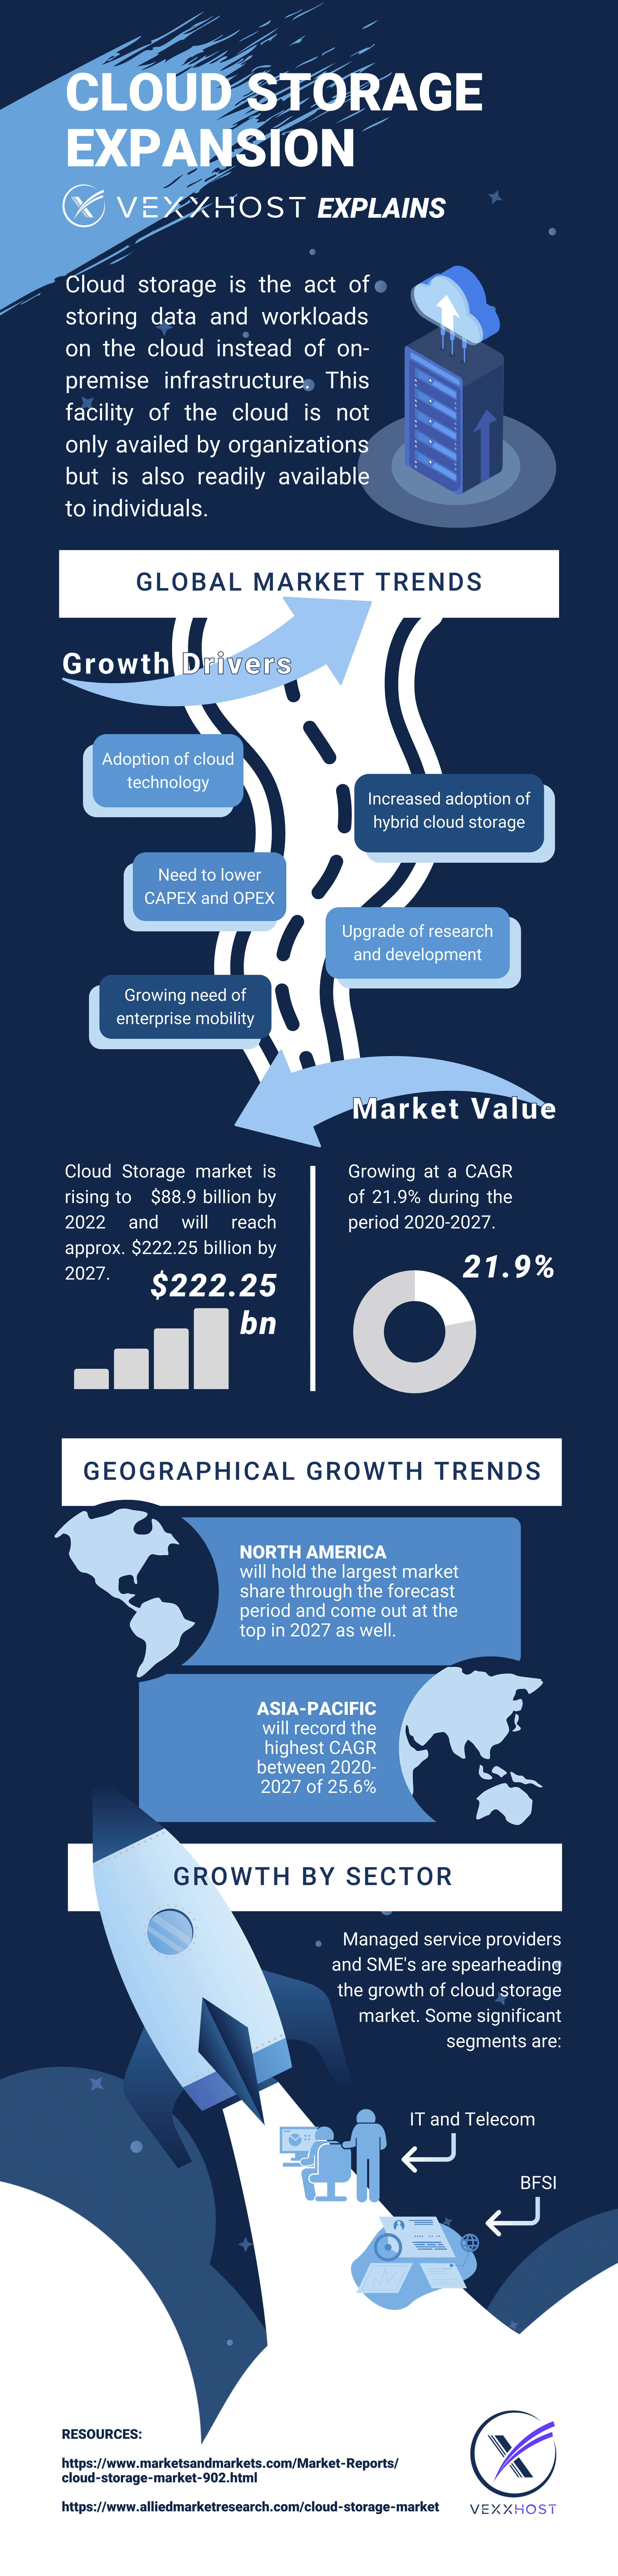 cloud storage growth and expansion infographic